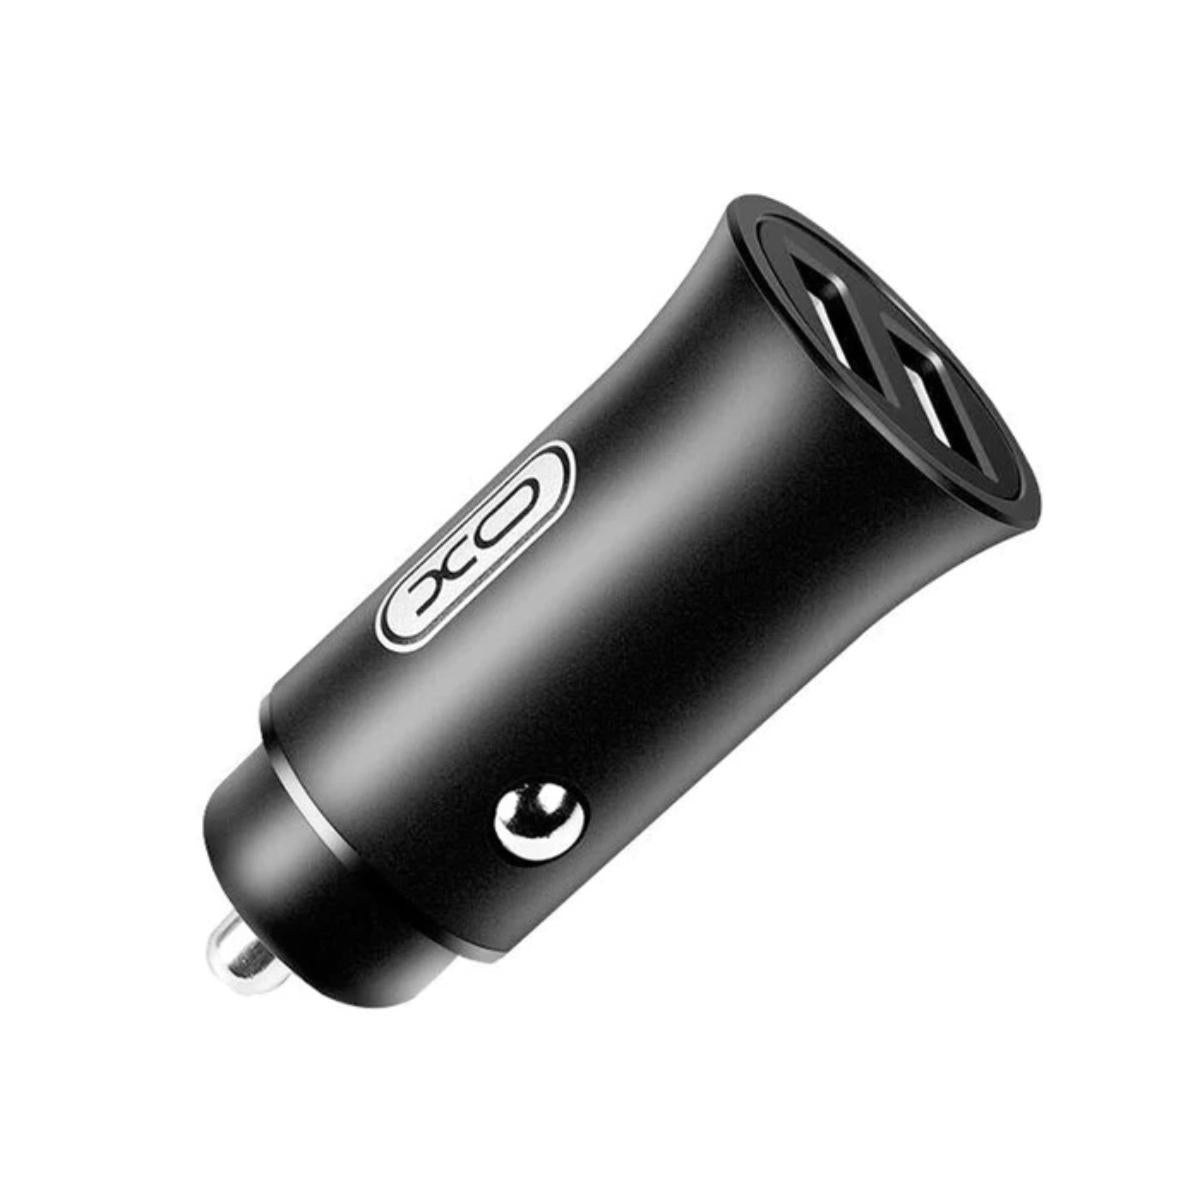 XO-Y38/AGTC XO-CC15 full metal aluminum car charger CHARGER / Black / N/A